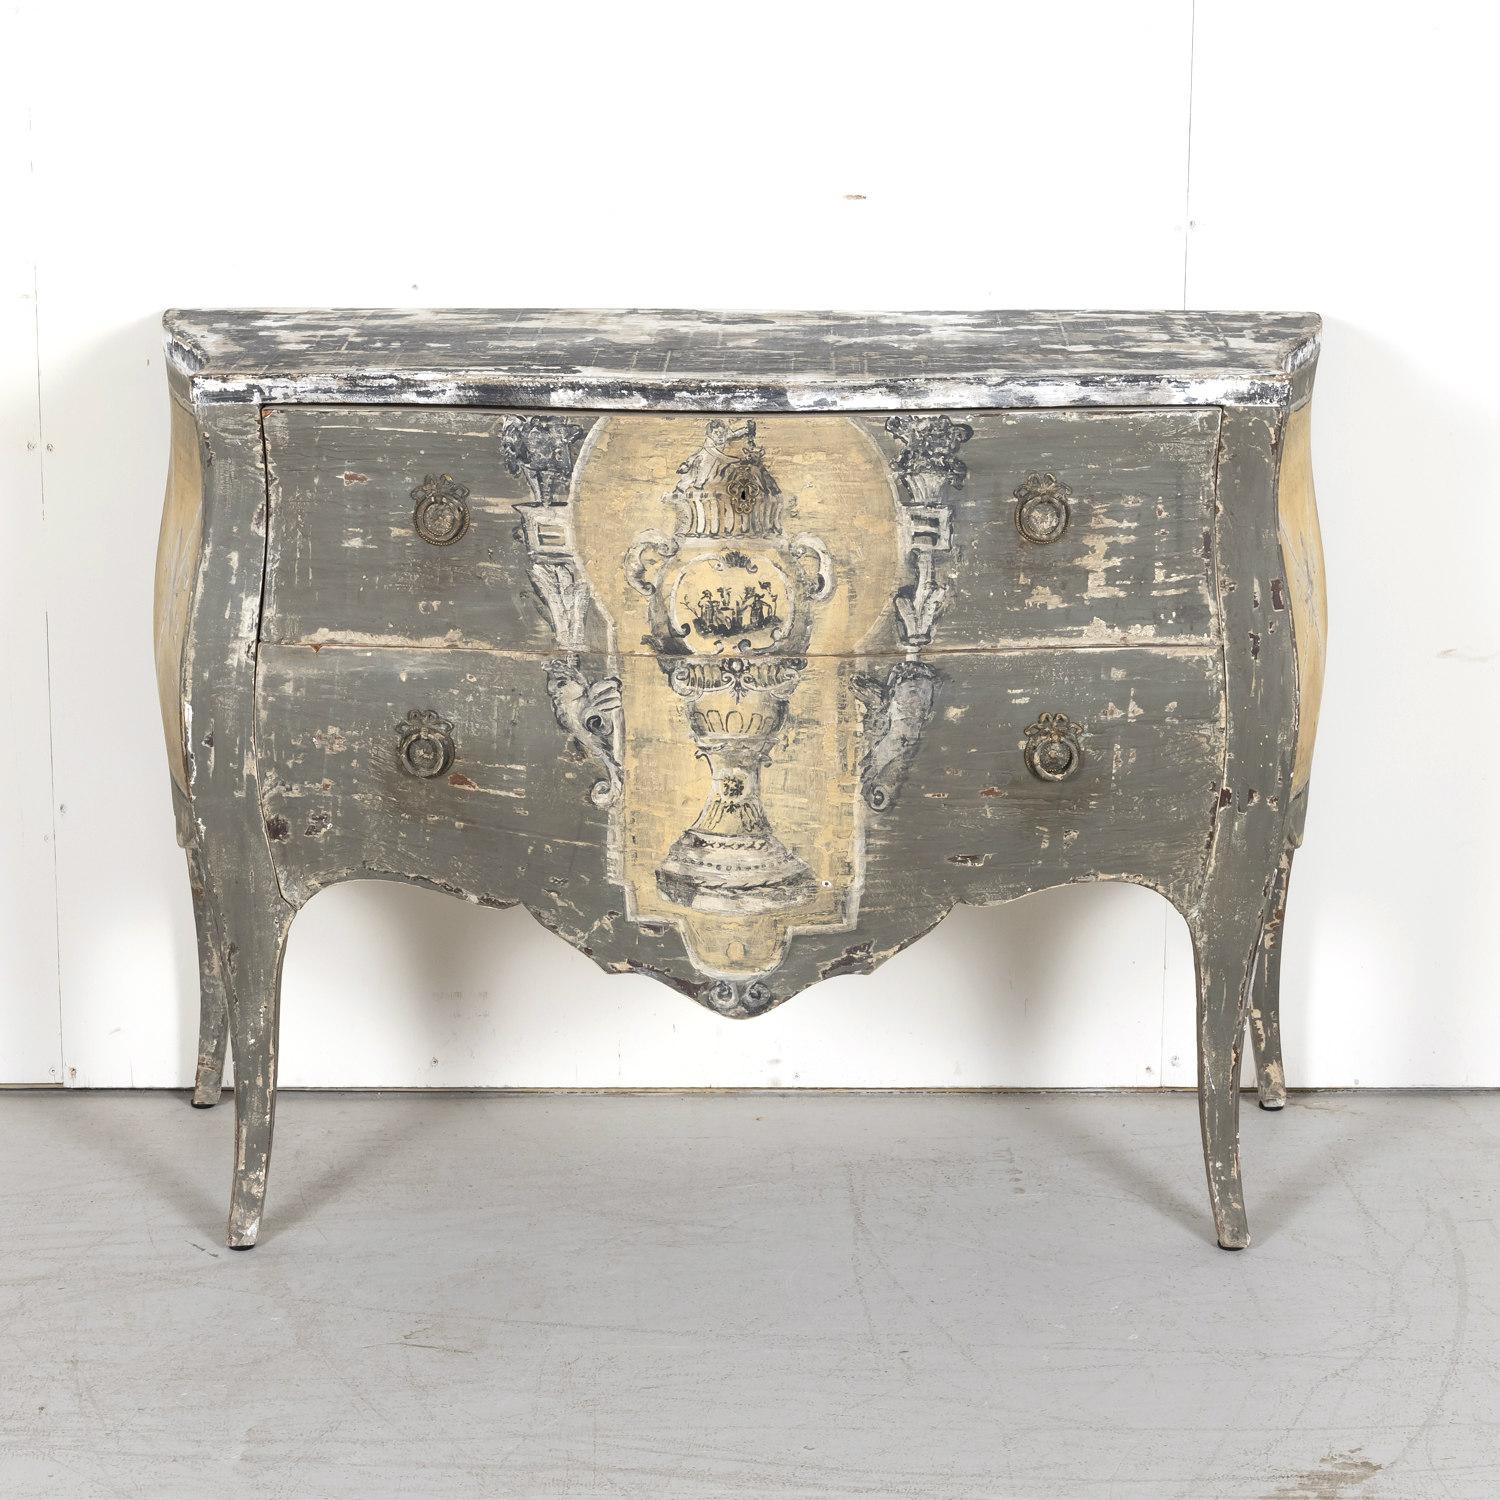 Antique French Louis XV style commode sauteuse constructed of painted wood having a serpentine top over two drawers, circa 1920s. Carved, shaped apron raised on cabriole legs. This elegant chest of drawers, also referred to as a 